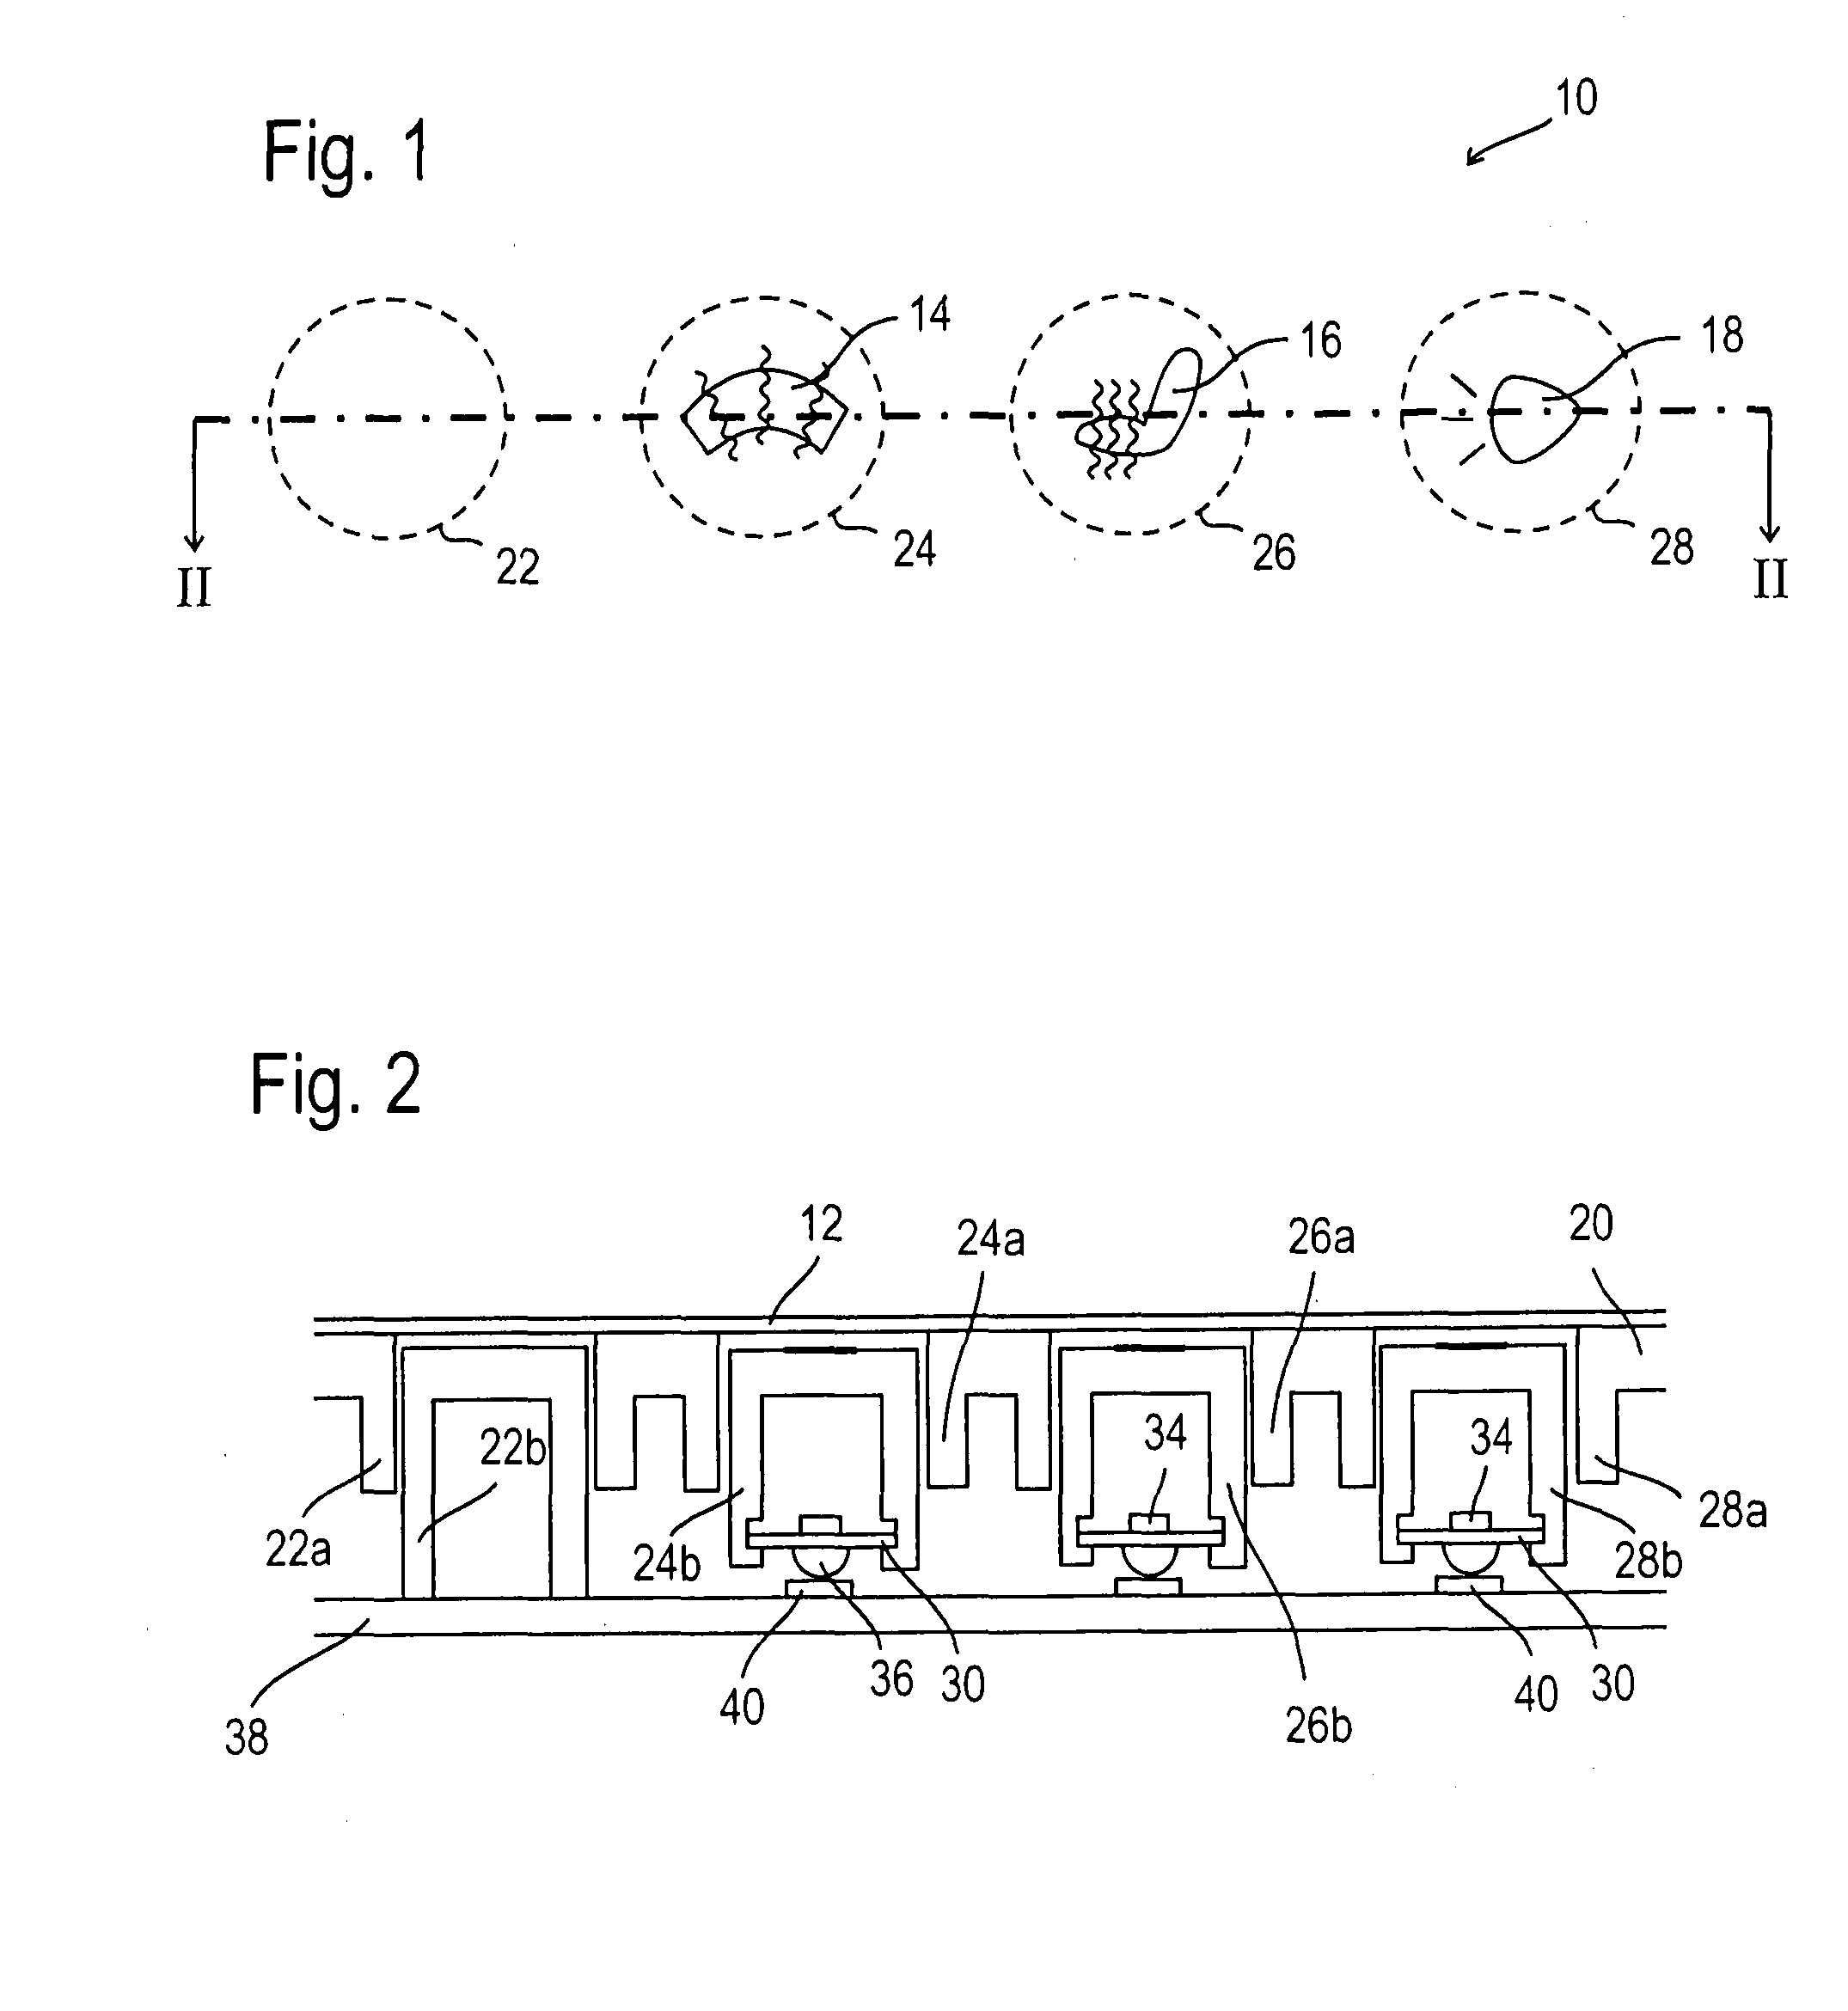 Group of momentary-contact switches as uniform control panel in motor vehicles